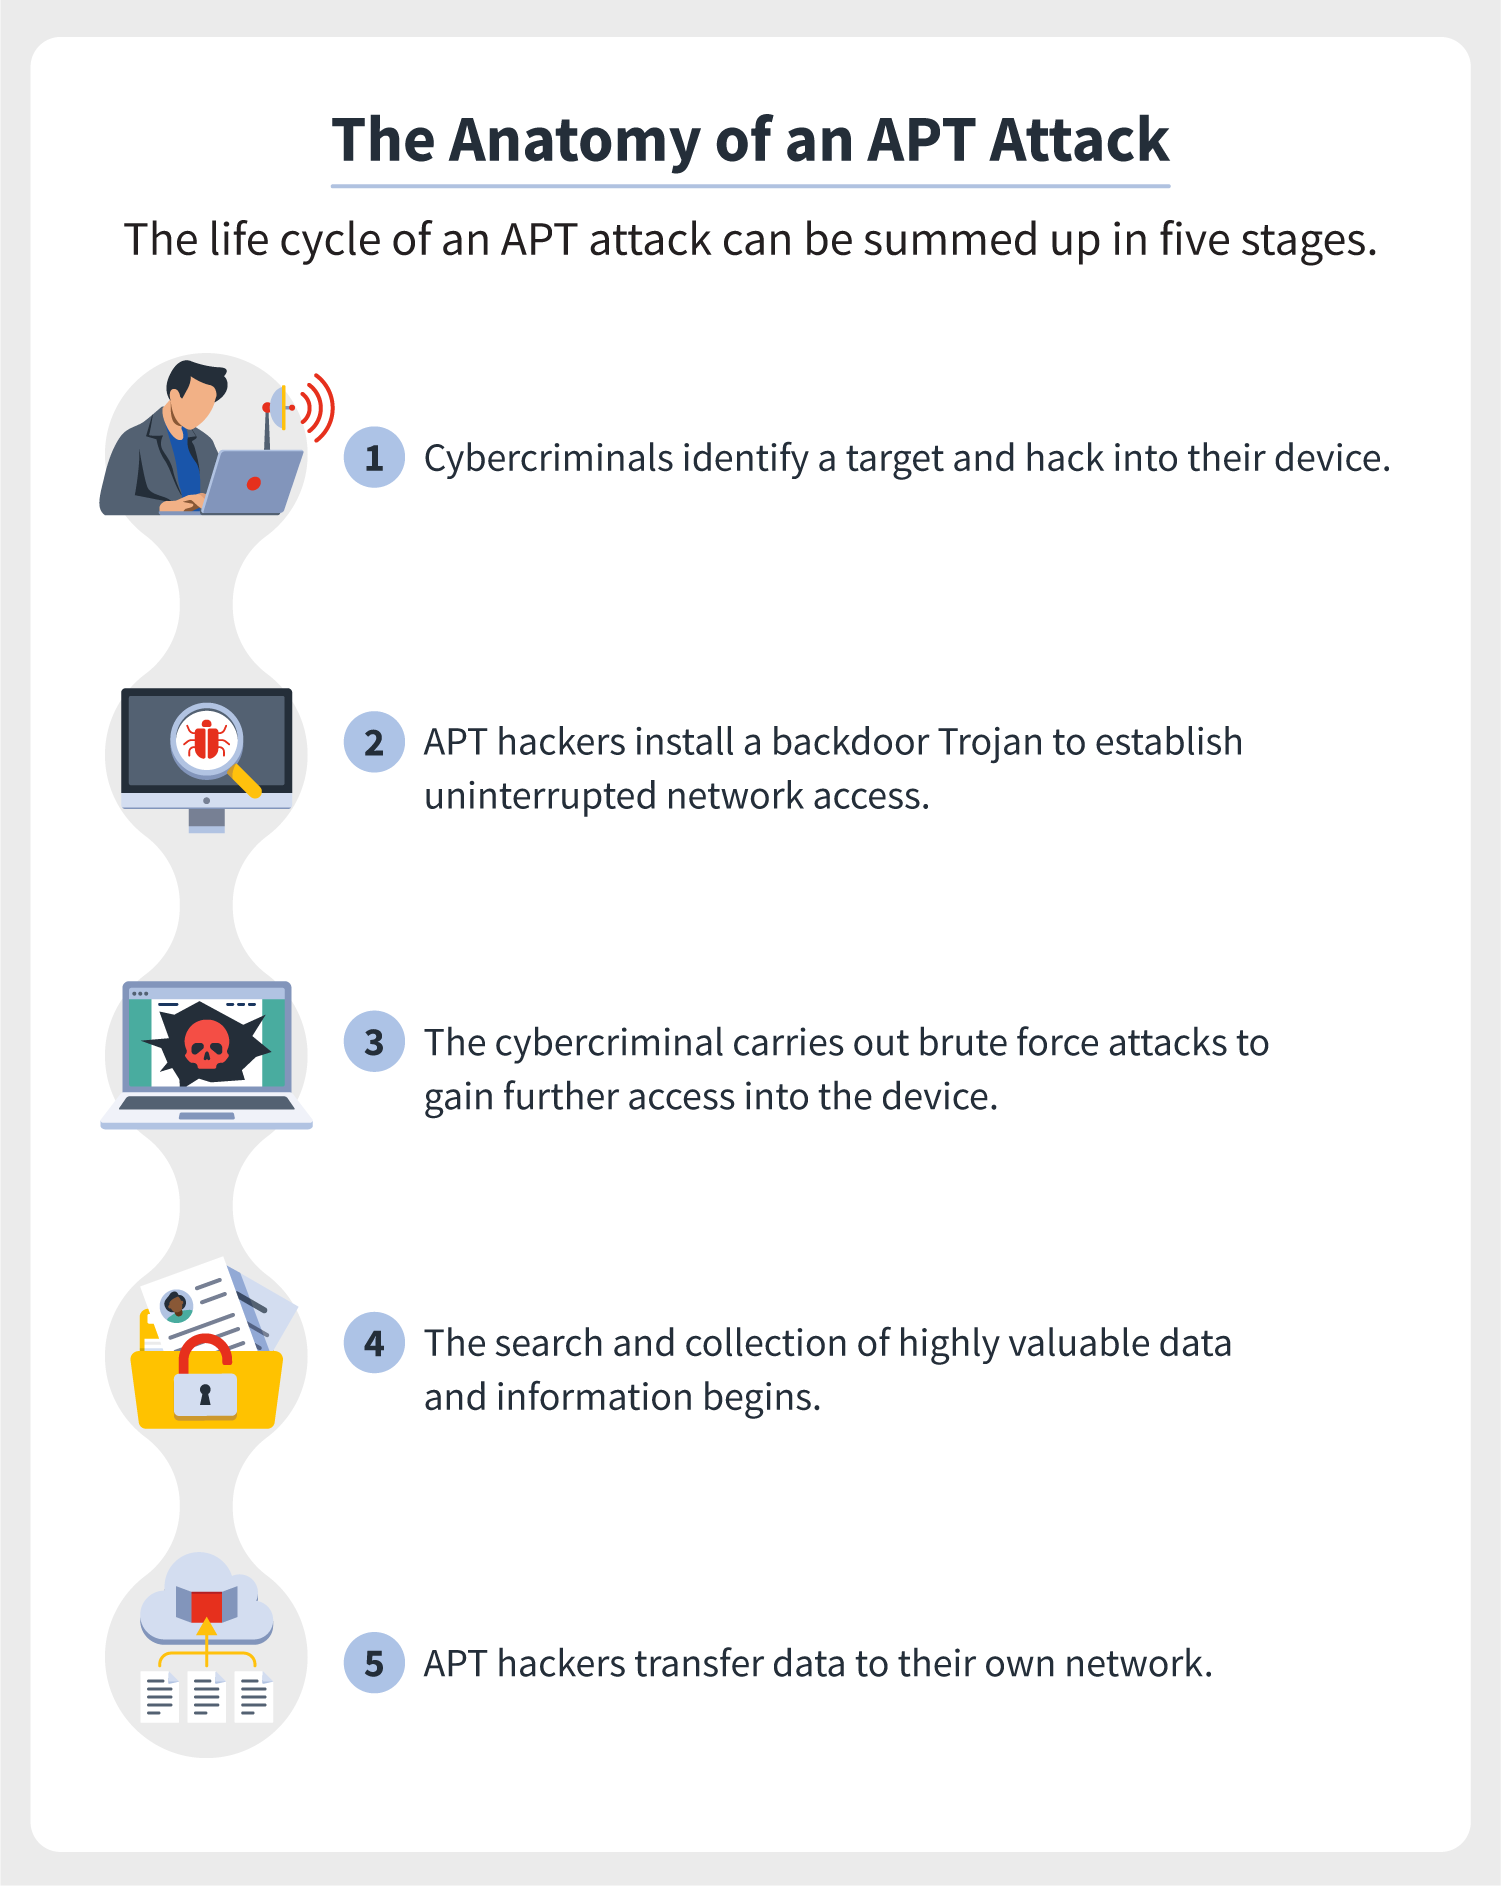 An illustration helps depict the life cycle of an advanced persistent threat attack, which is made up of five stages